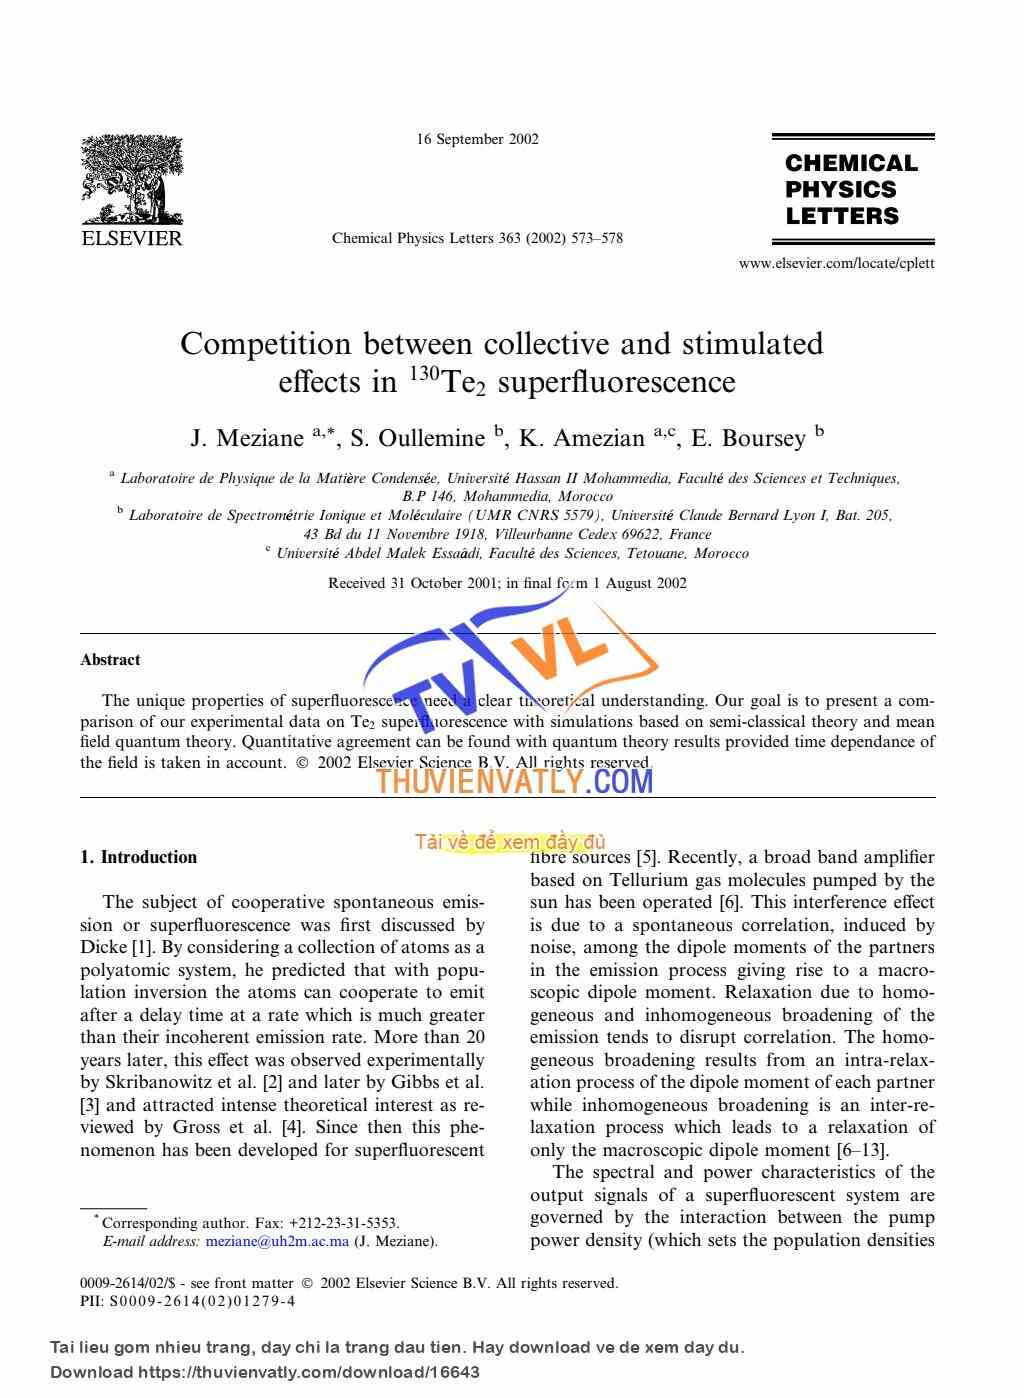 Competition between collective and stimulated in Te2 superfluorescence